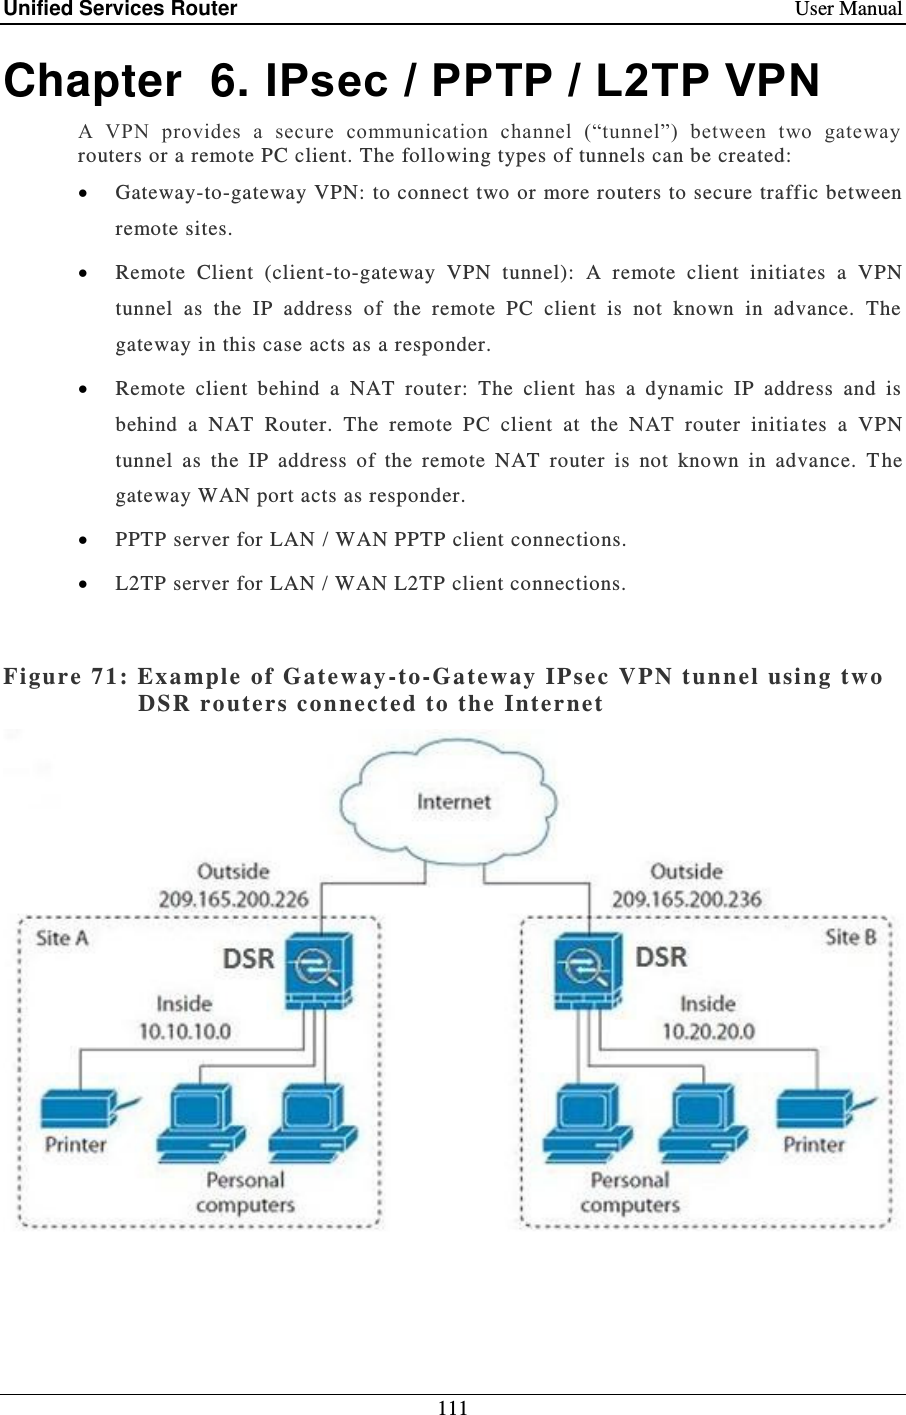 Unified Services Router    User Manual 111  Chapter  6. IPsec / PPTP / L2TP VPN A  VPN  provides  a  secure  communication  channel  (“tunnel”)  between  two  gateway routers or a remote PC client. The following types of tunnels can be created:   Gateway-to-gateway VPN: to connect two or more routers to secure traffic between remote sites.   Remote  Client  (client-to-gateway  VPN  tunnel):  A  remote  client  initiates  a  VPN tunnel  as  the  IP  address  of  the  remote  PC  client  is  not  known  in  advance.  The gateway in this case acts as a responder.  Remote  client  behind  a  NAT  router:  The  client  has  a  dynamic  IP  address  and  is behind  a  NAT  Router.  The  remote  PC  client  at  the  NAT  router  initia tes  a  VPN tunnel  as  the  IP  address  of  the  remote  NAT  router  is  not  known  in  advance.  T he gateway WAN port acts as responder.  PPTP server for LAN / WAN PPTP client connections.  L2TP server for LAN / WAN L2TP client connections.  Figure 71: Ex ample  of  Gateway -to-Gateway  IPsec  VPN t unnel using two DSR routers connect ed to the Internet      